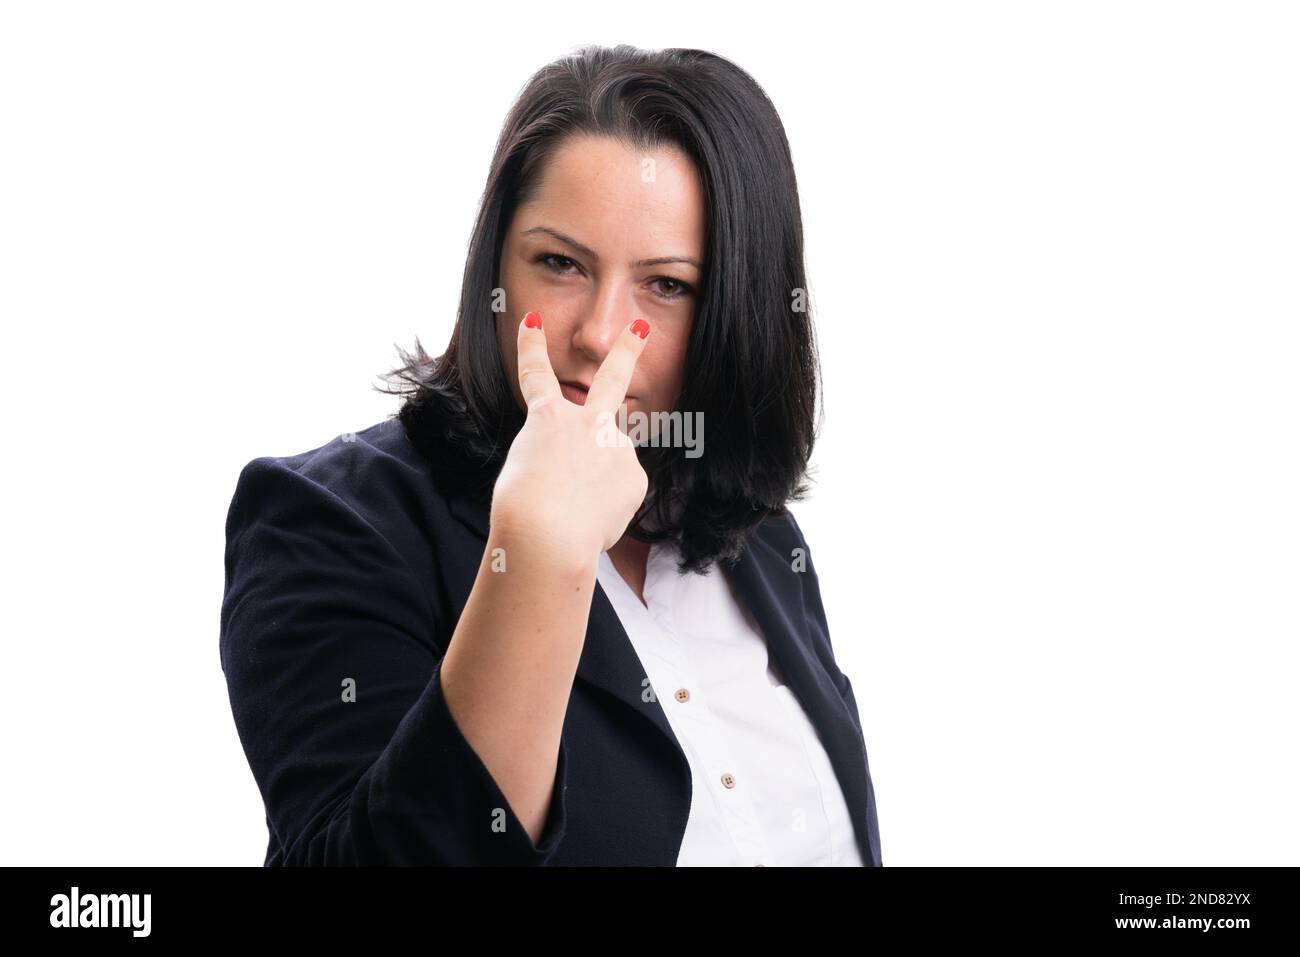 Adult businesswoman wearing formal suit with serious expression making eyes on you gesture using fingers as corporate supervisor concept isolated on w Stock Photo